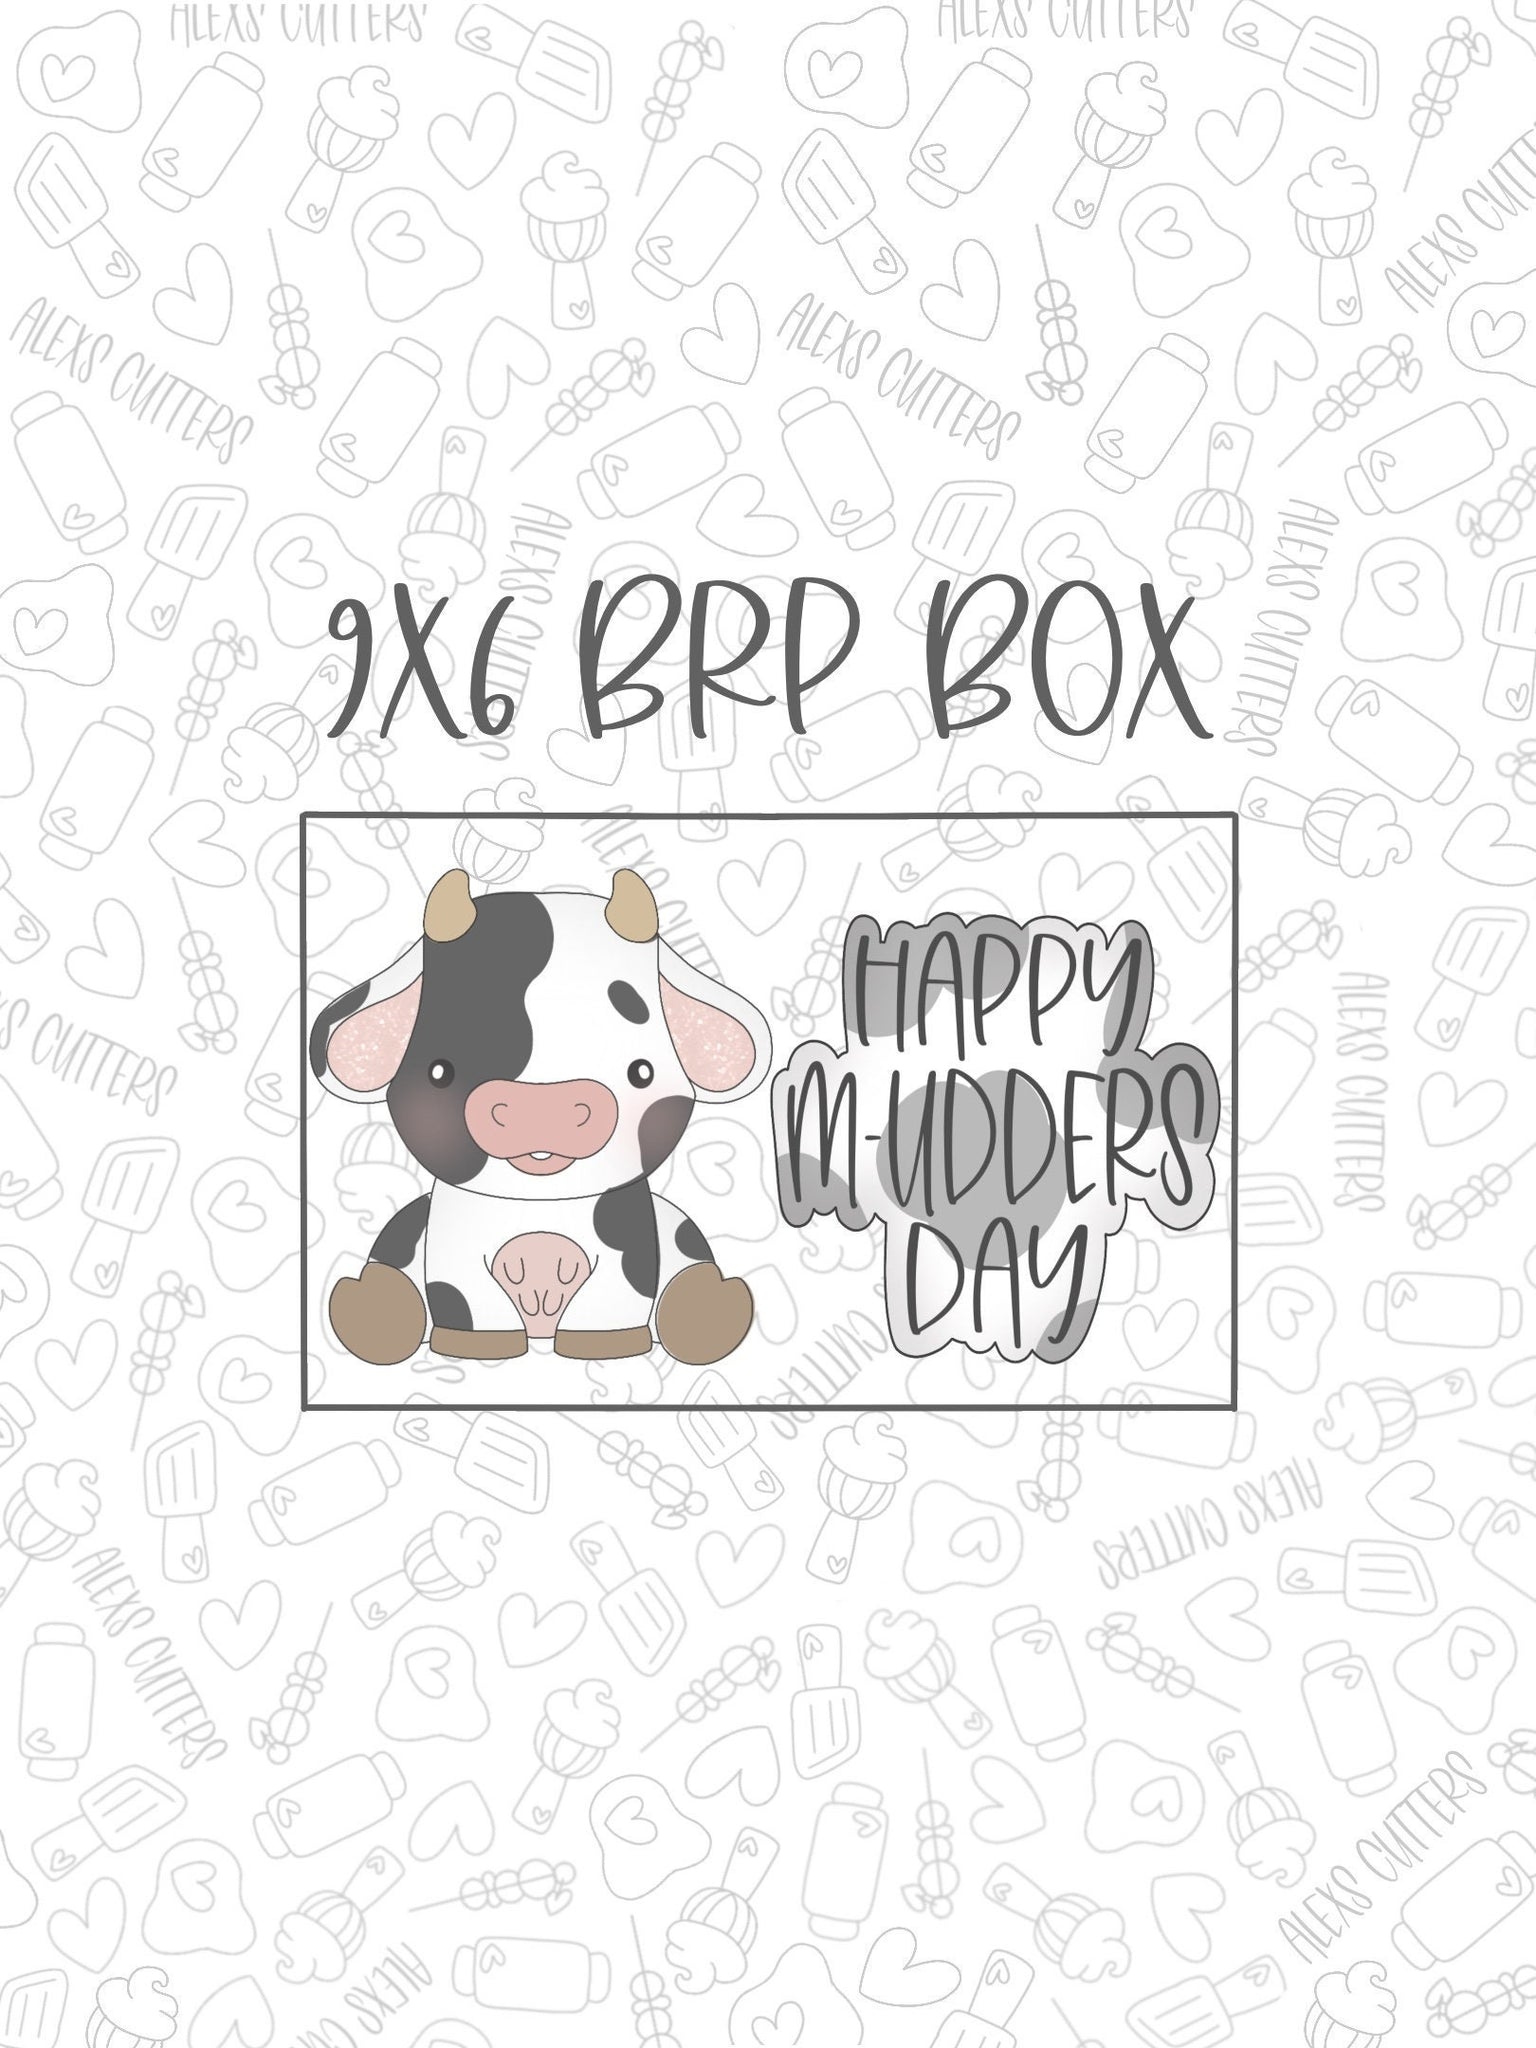 Happy M-udders Day Collection for 9.5 x 6 brp box